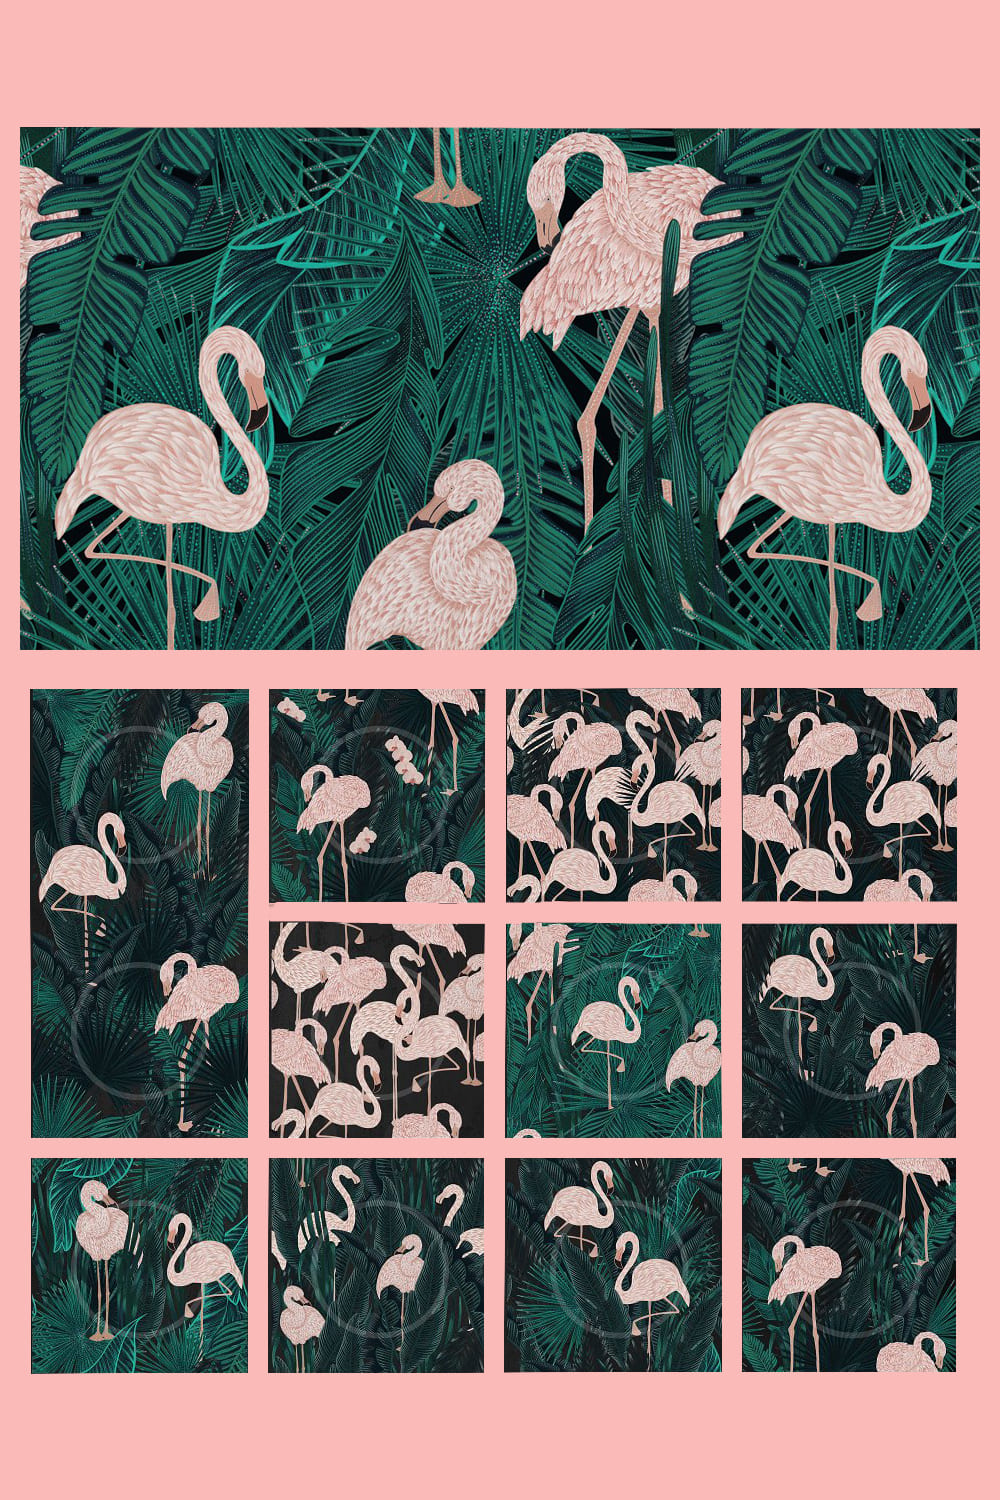 Diverse of flamingo in the different colors.